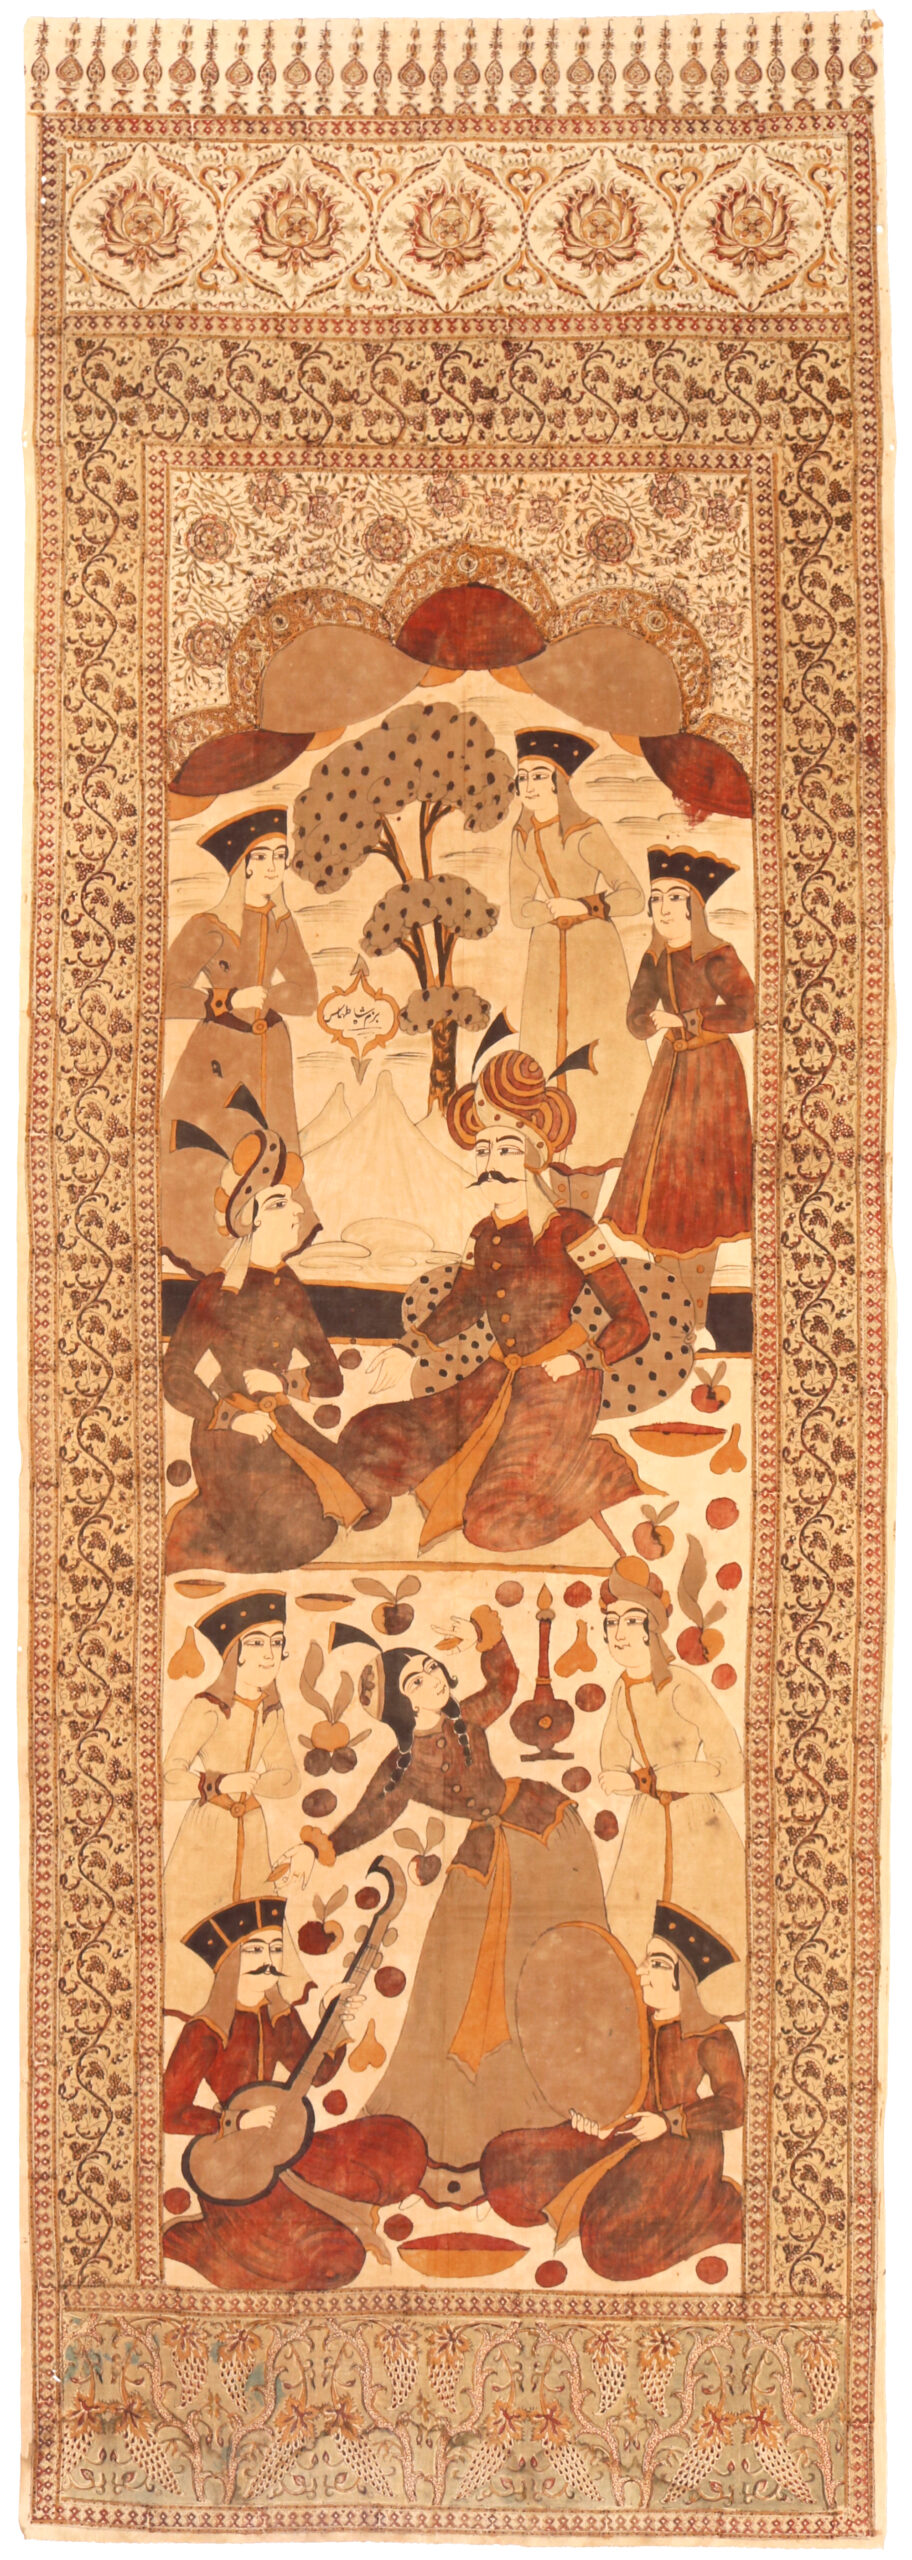 2 Qalamkar hanging, Esfahan, late 19th century. Cotton block-printed and painted with a scene of Shah Tahmasp I receiving the Mughal Emperor Humayun in 1540